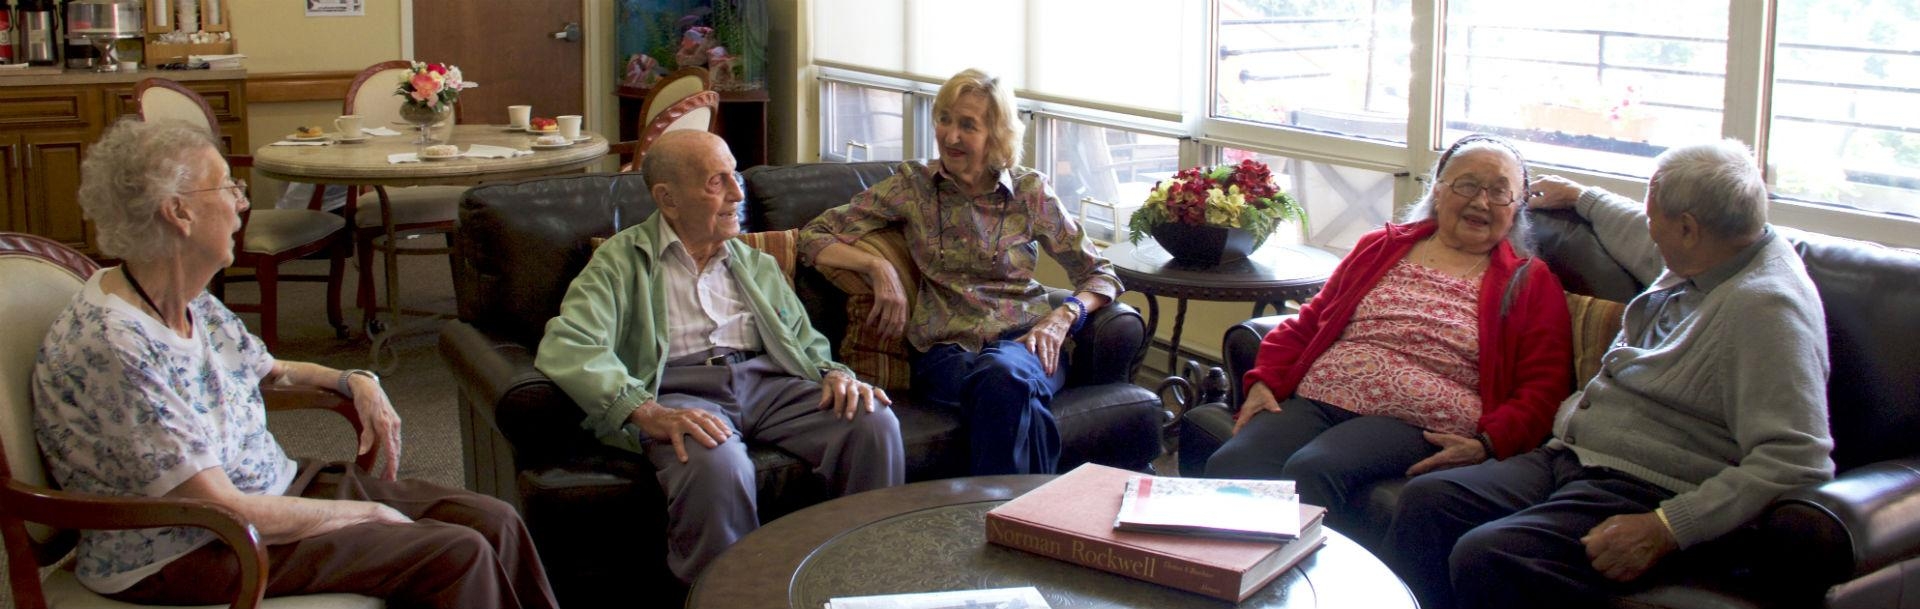 Residents socializing in the lounge